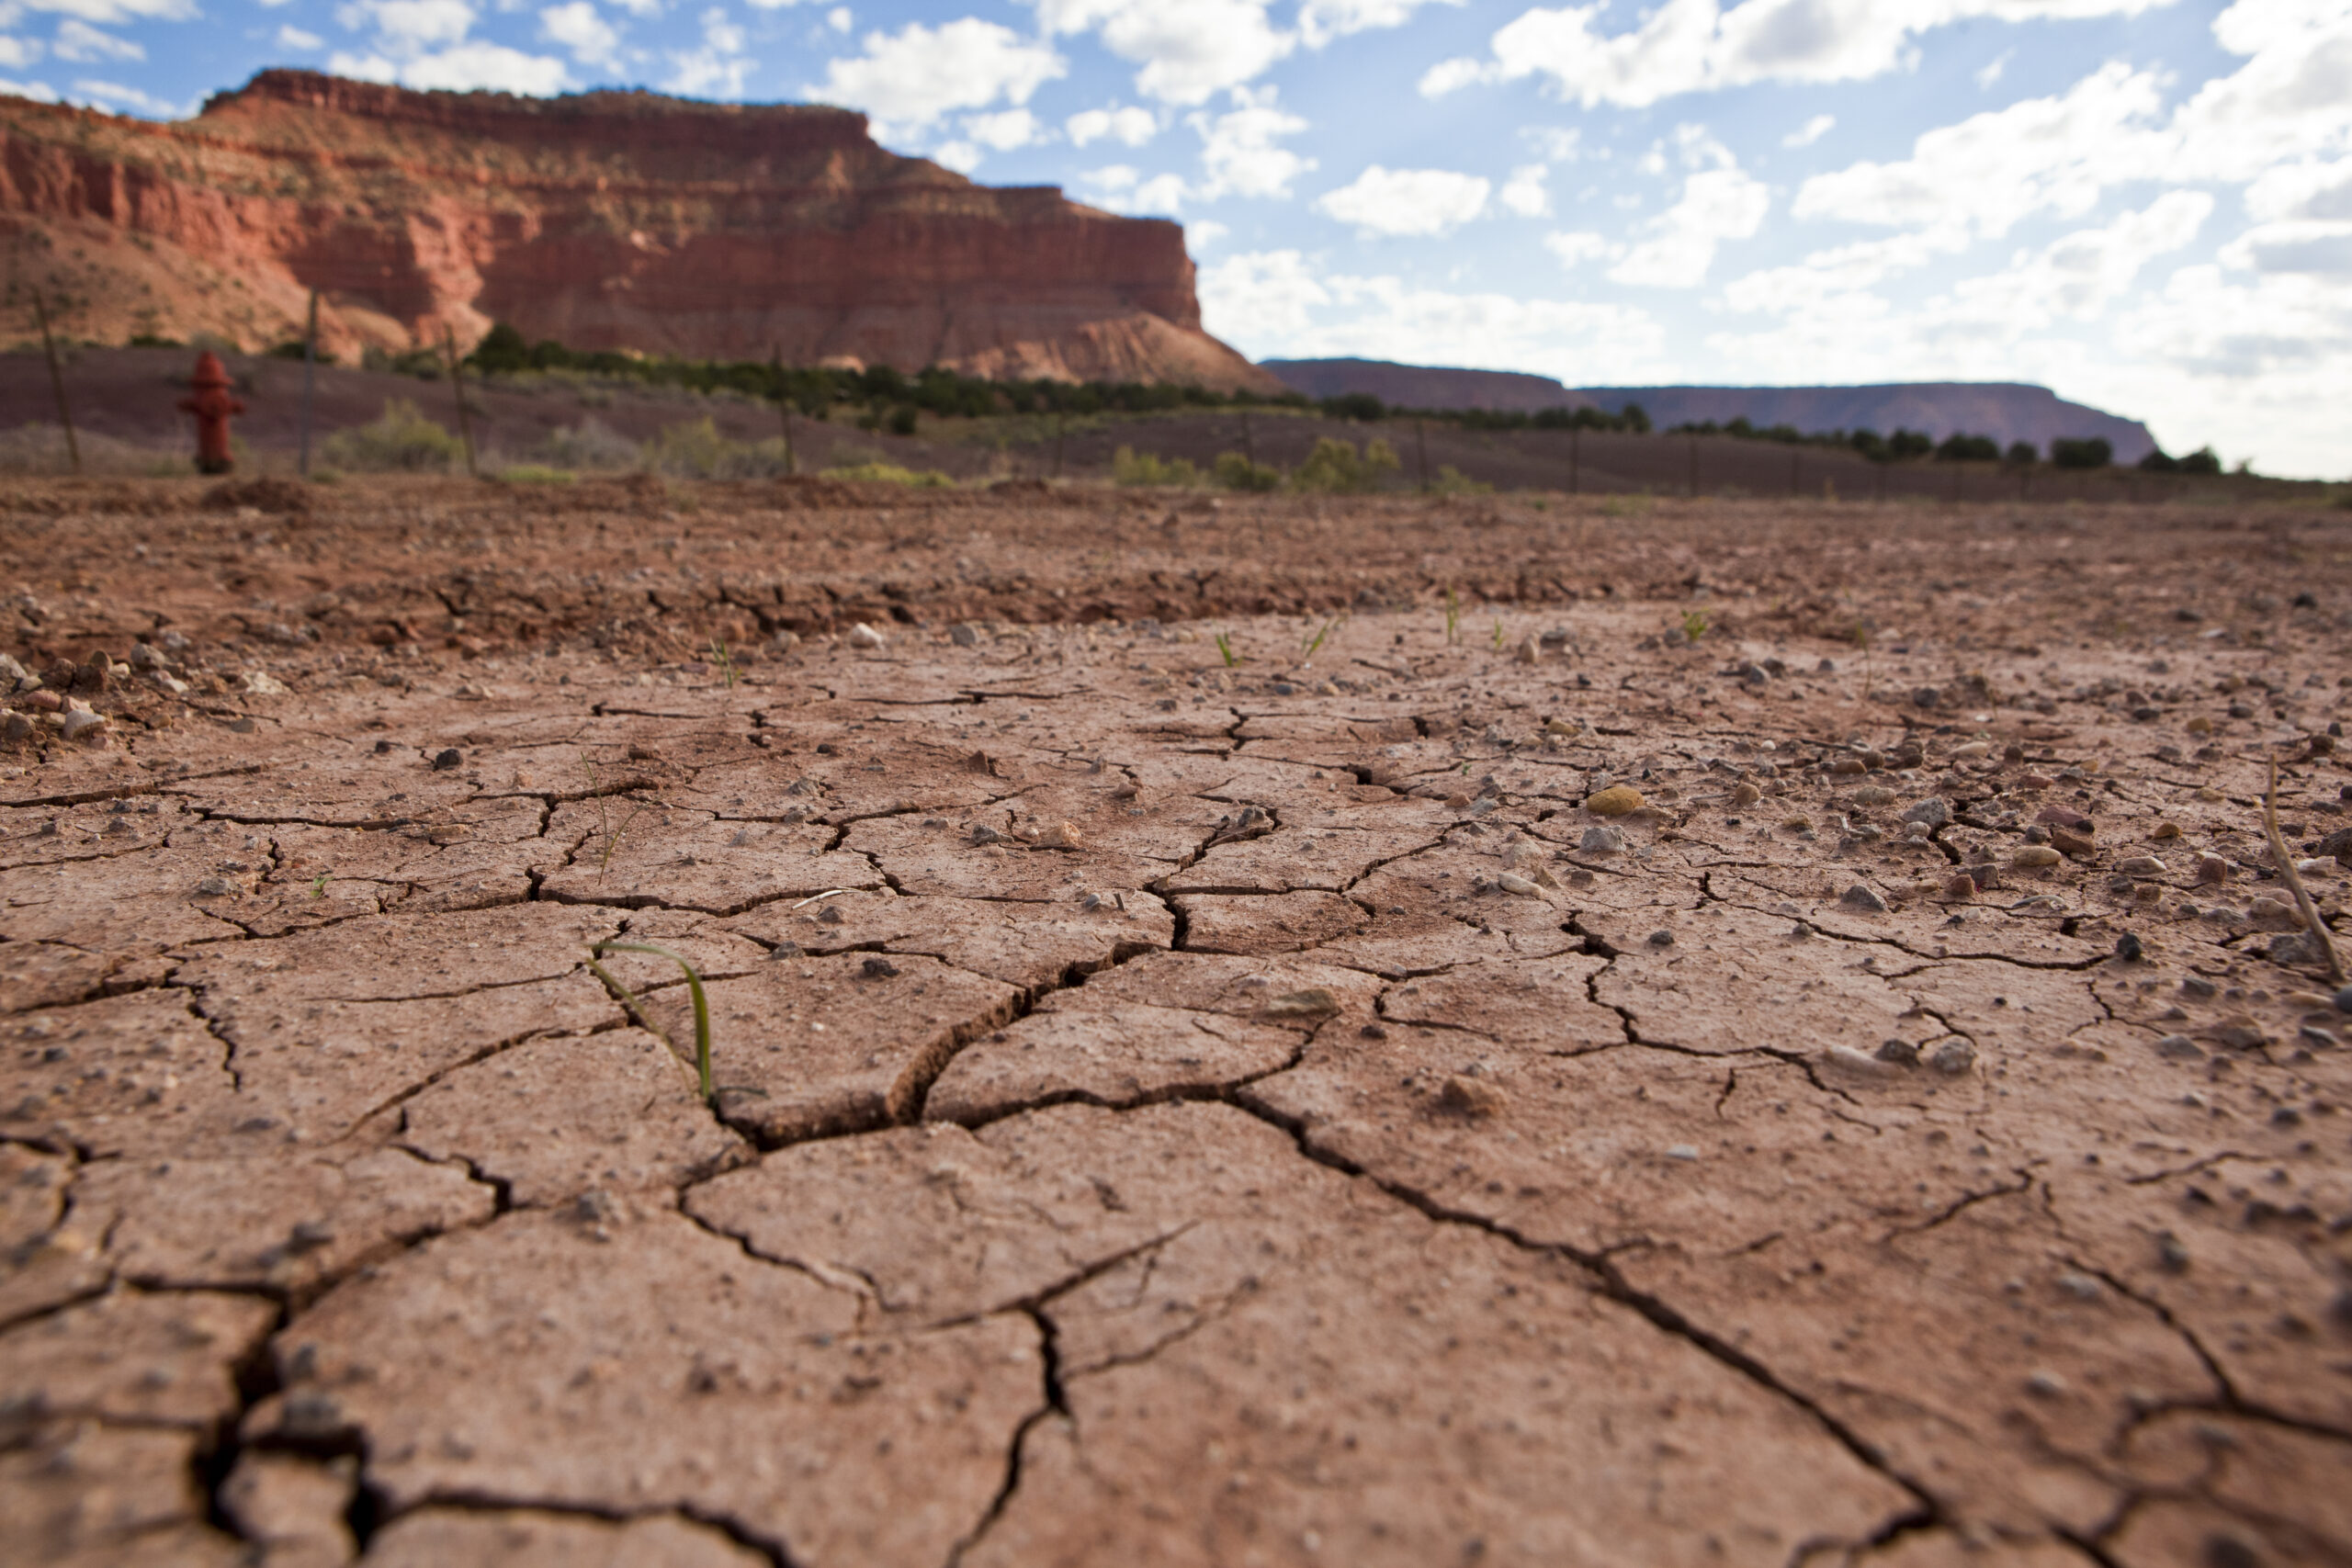 Worst Drought In 1,000 Years Forecasted For The U.S.